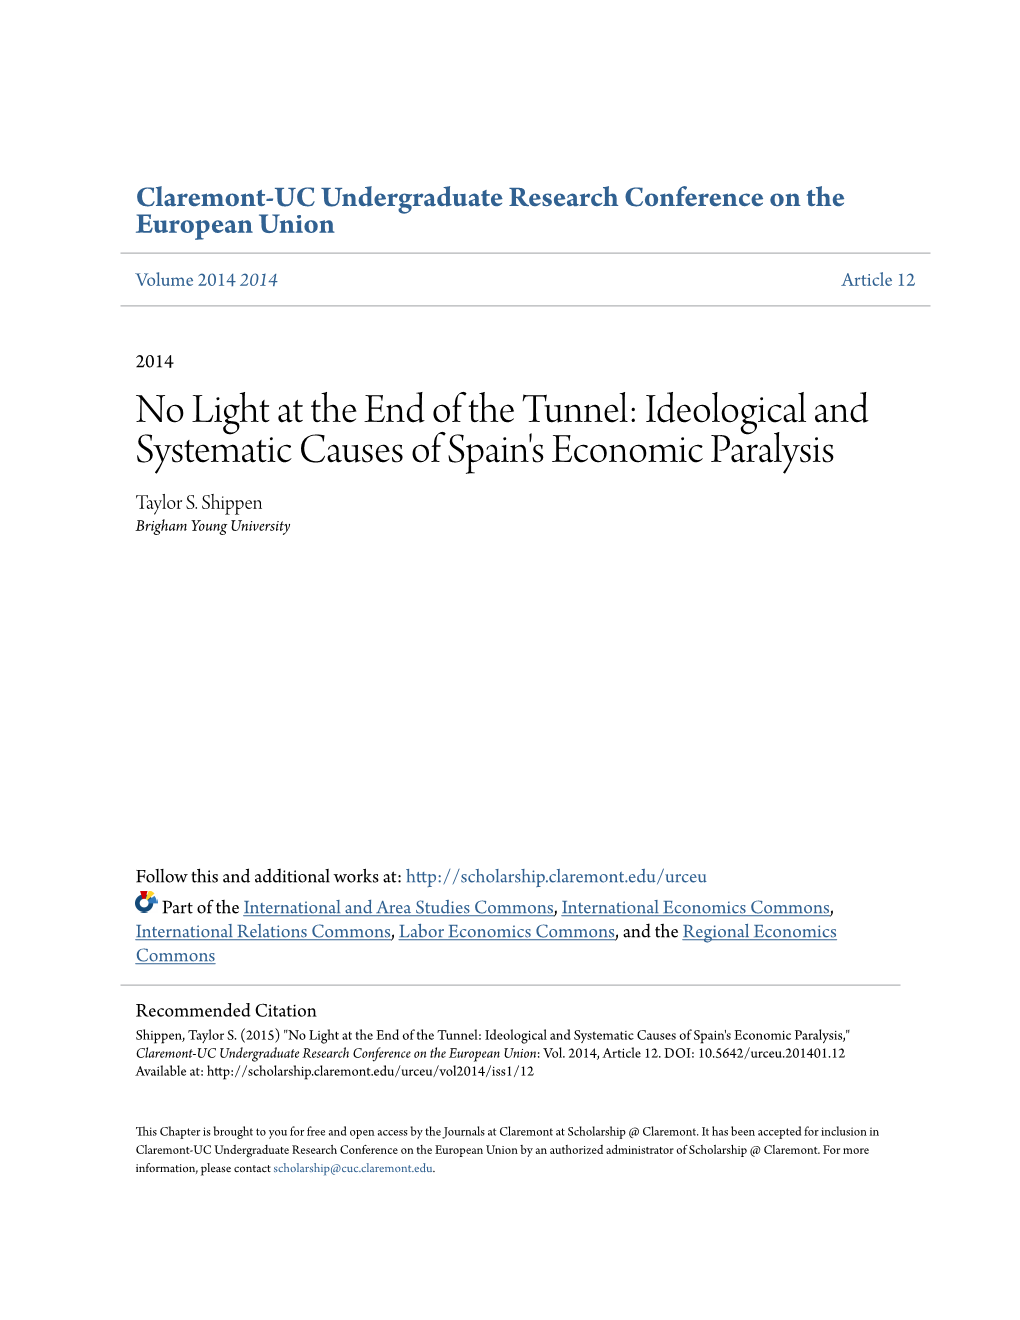 Ideological and Systematic Causes of Spain's Economic Paralysis Taylor S